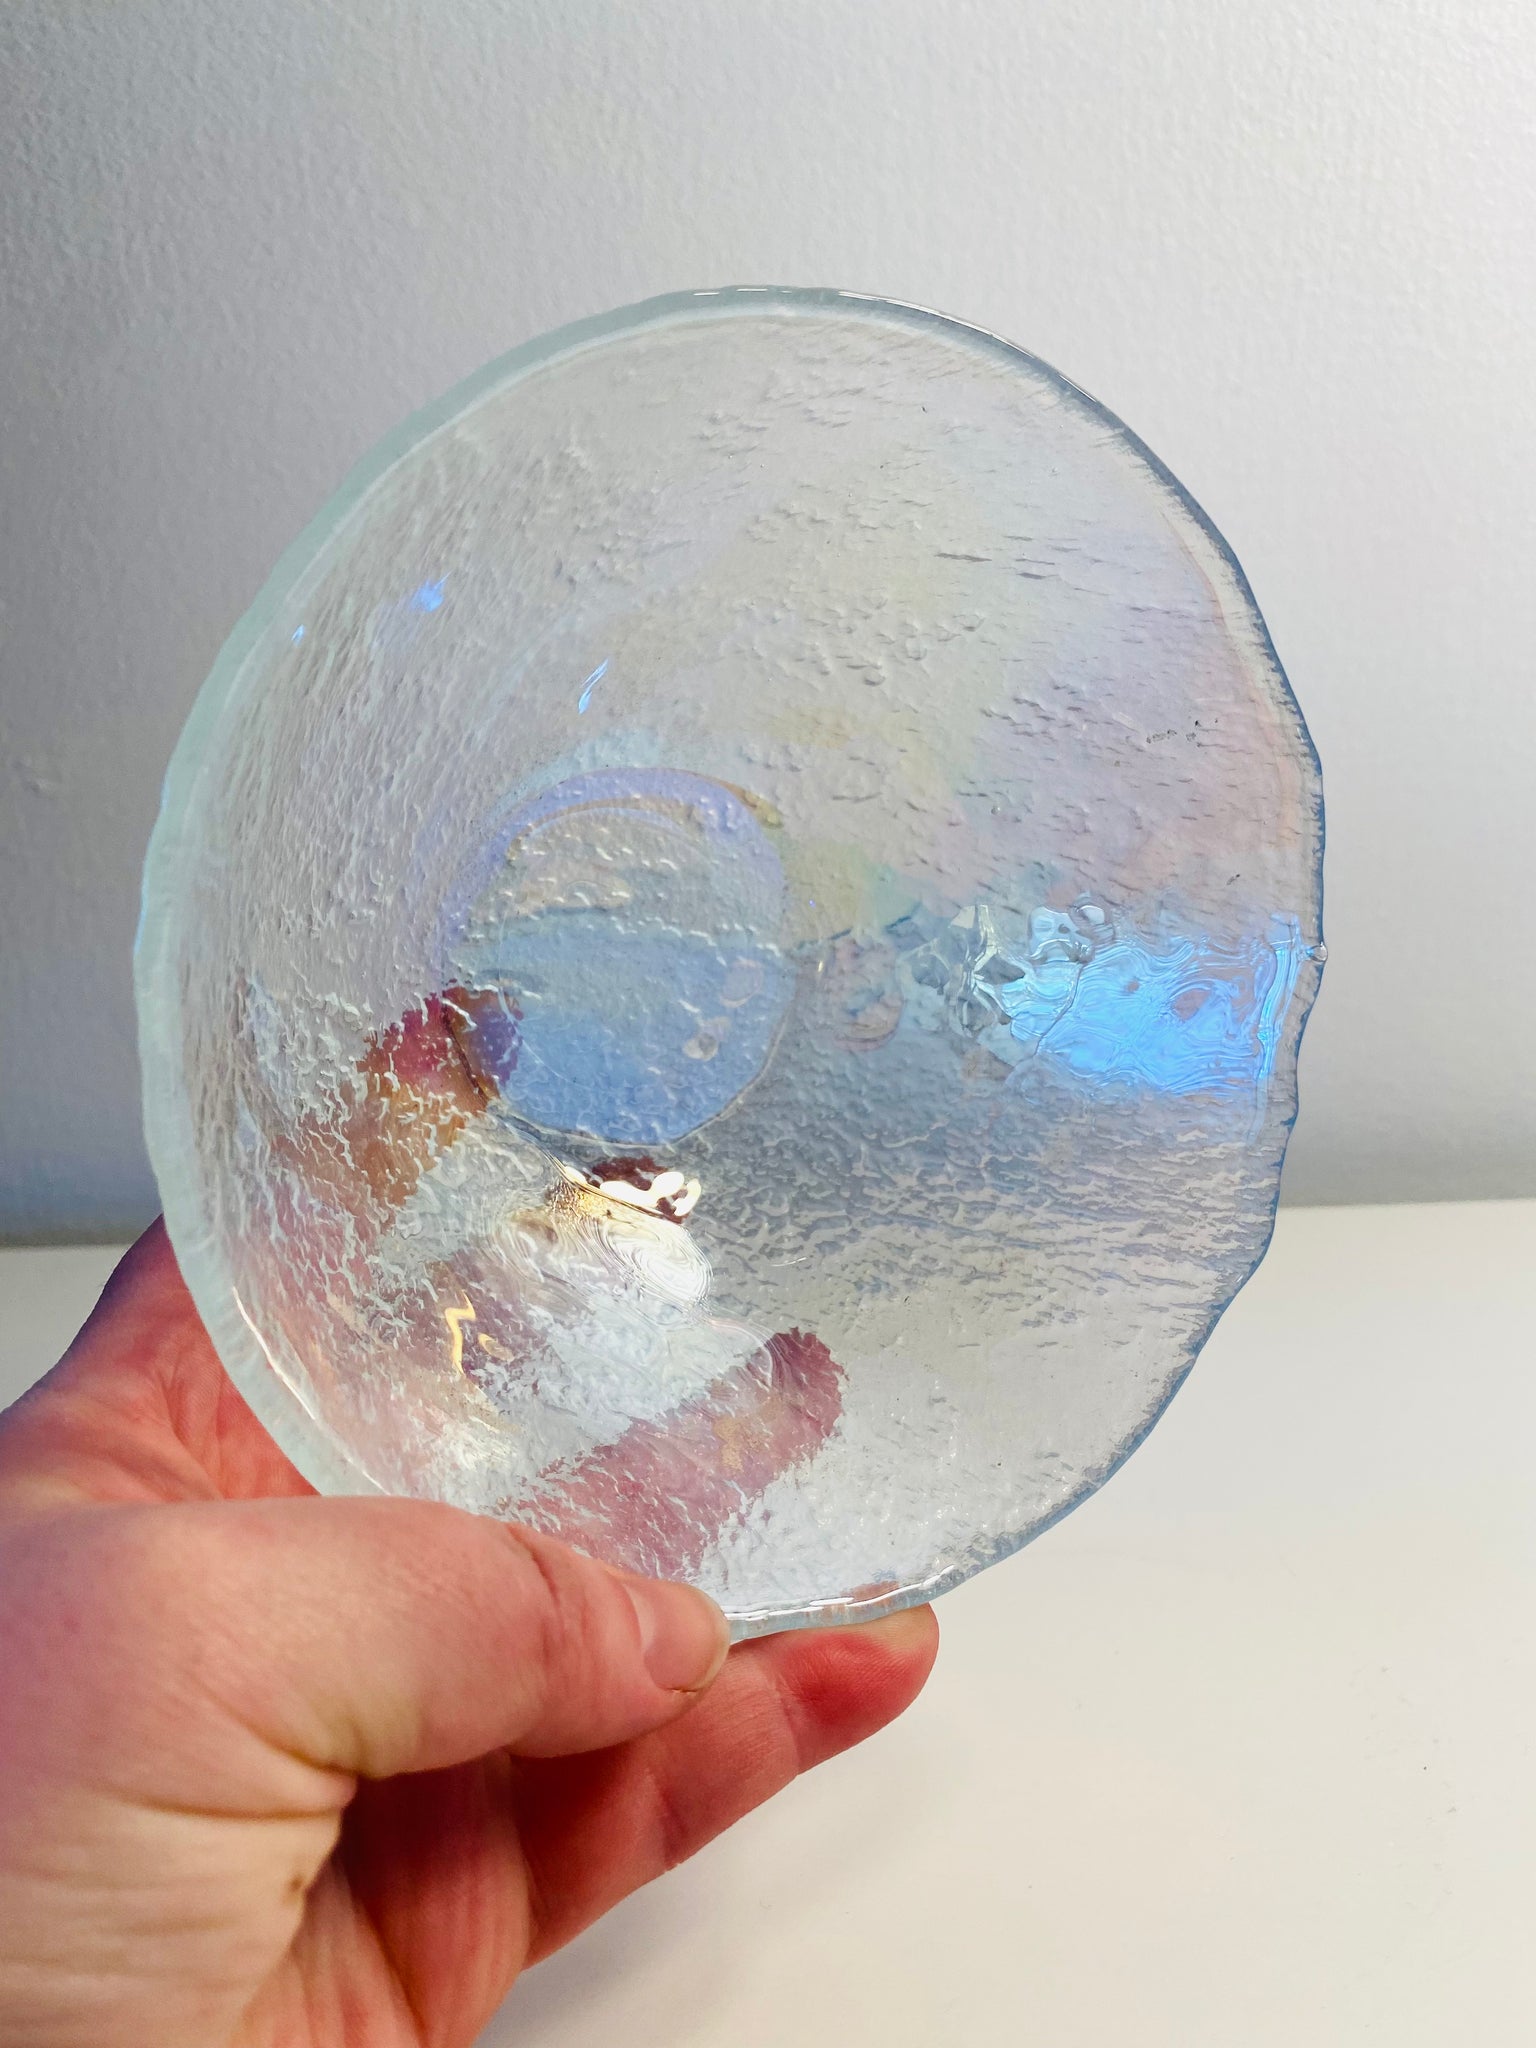 Opalescent wavy bowl